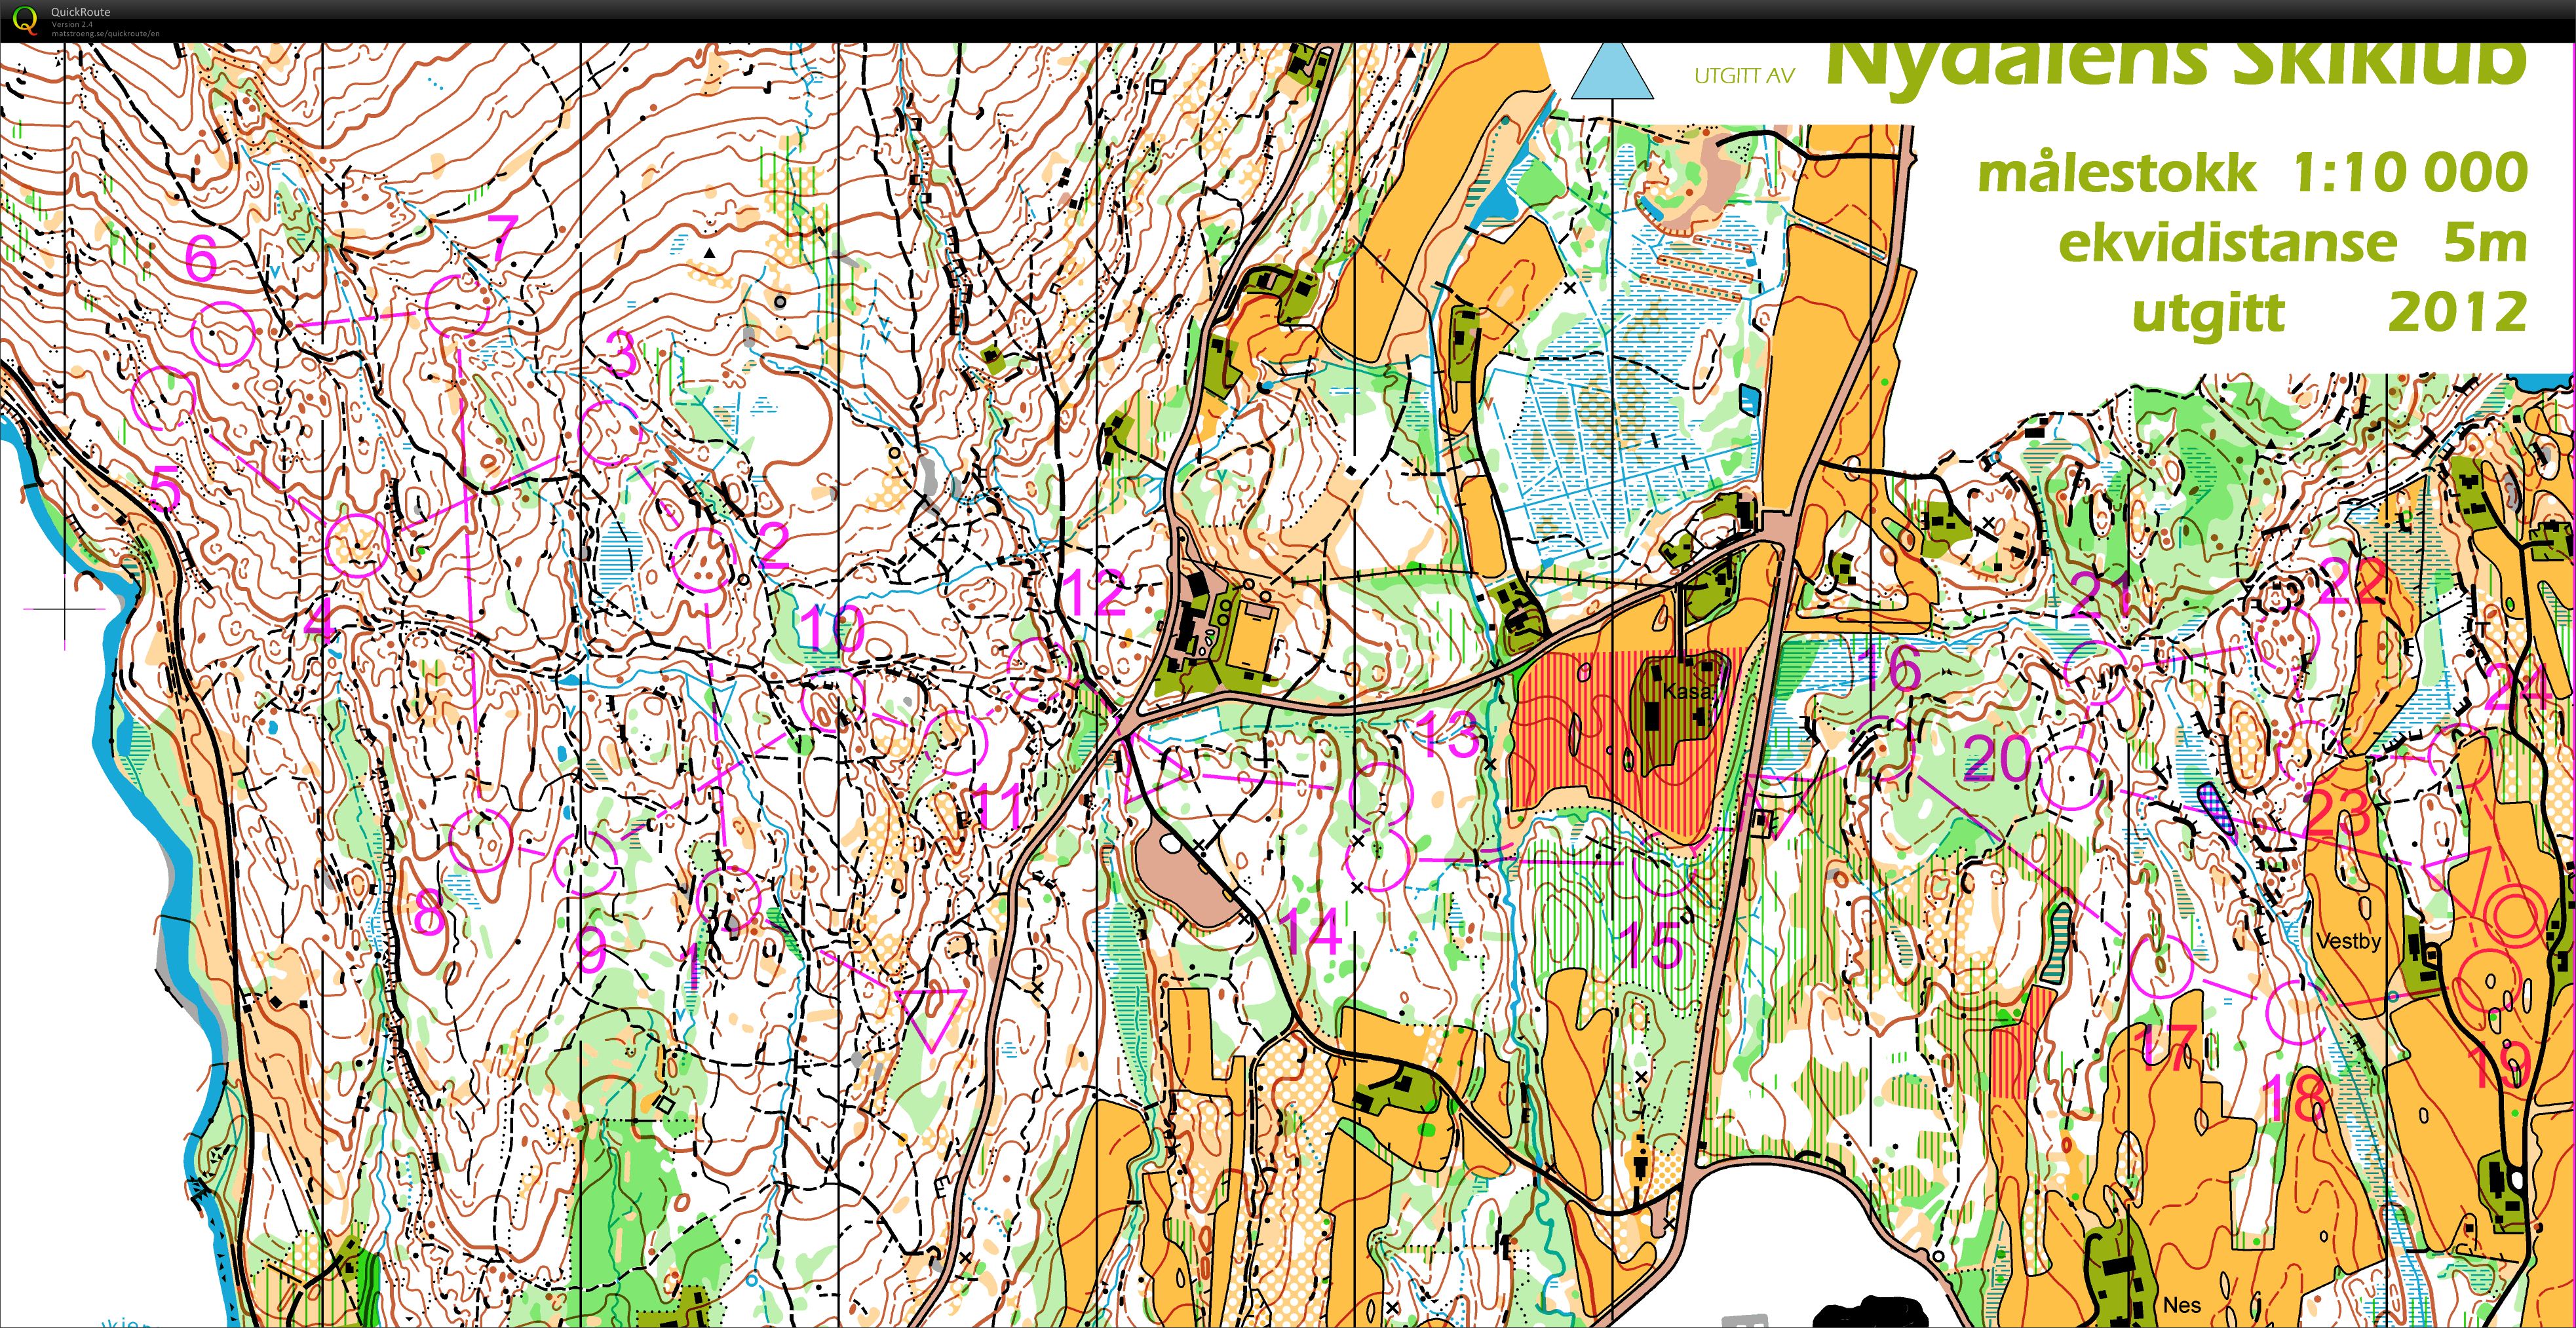 Norwegian Champs Middle M21 Final (first 9 controls) (2012-09-15)